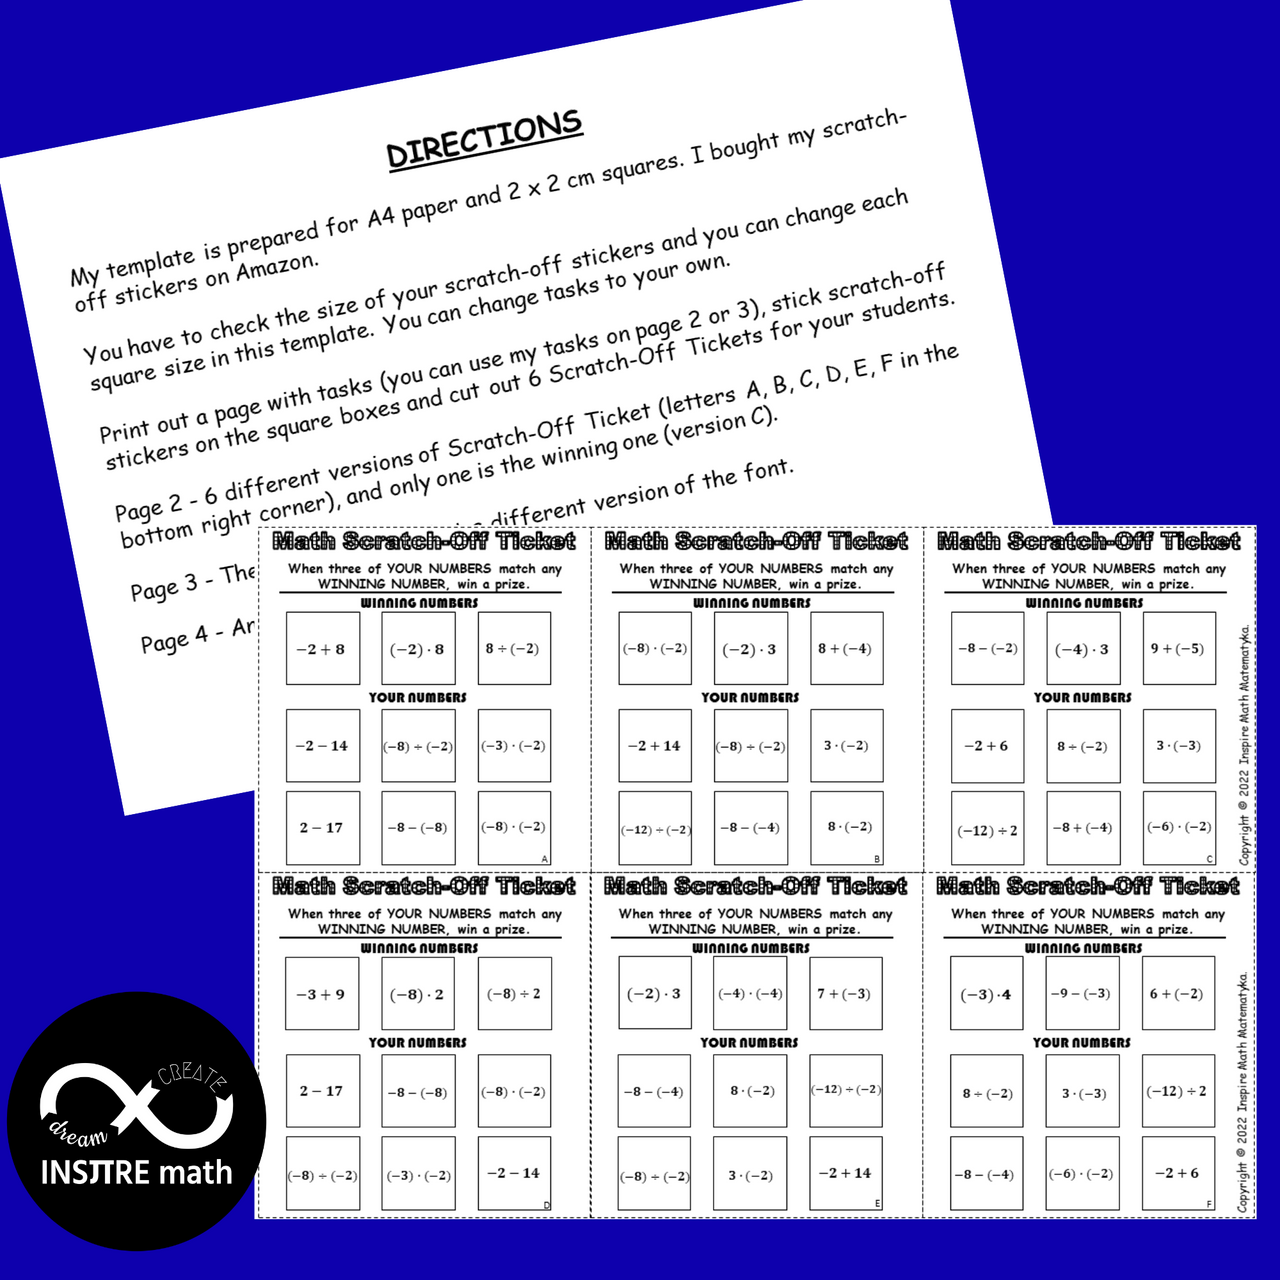 FREE Math Scratch-Off Tickets Lottery Editable Template + Integer Operations